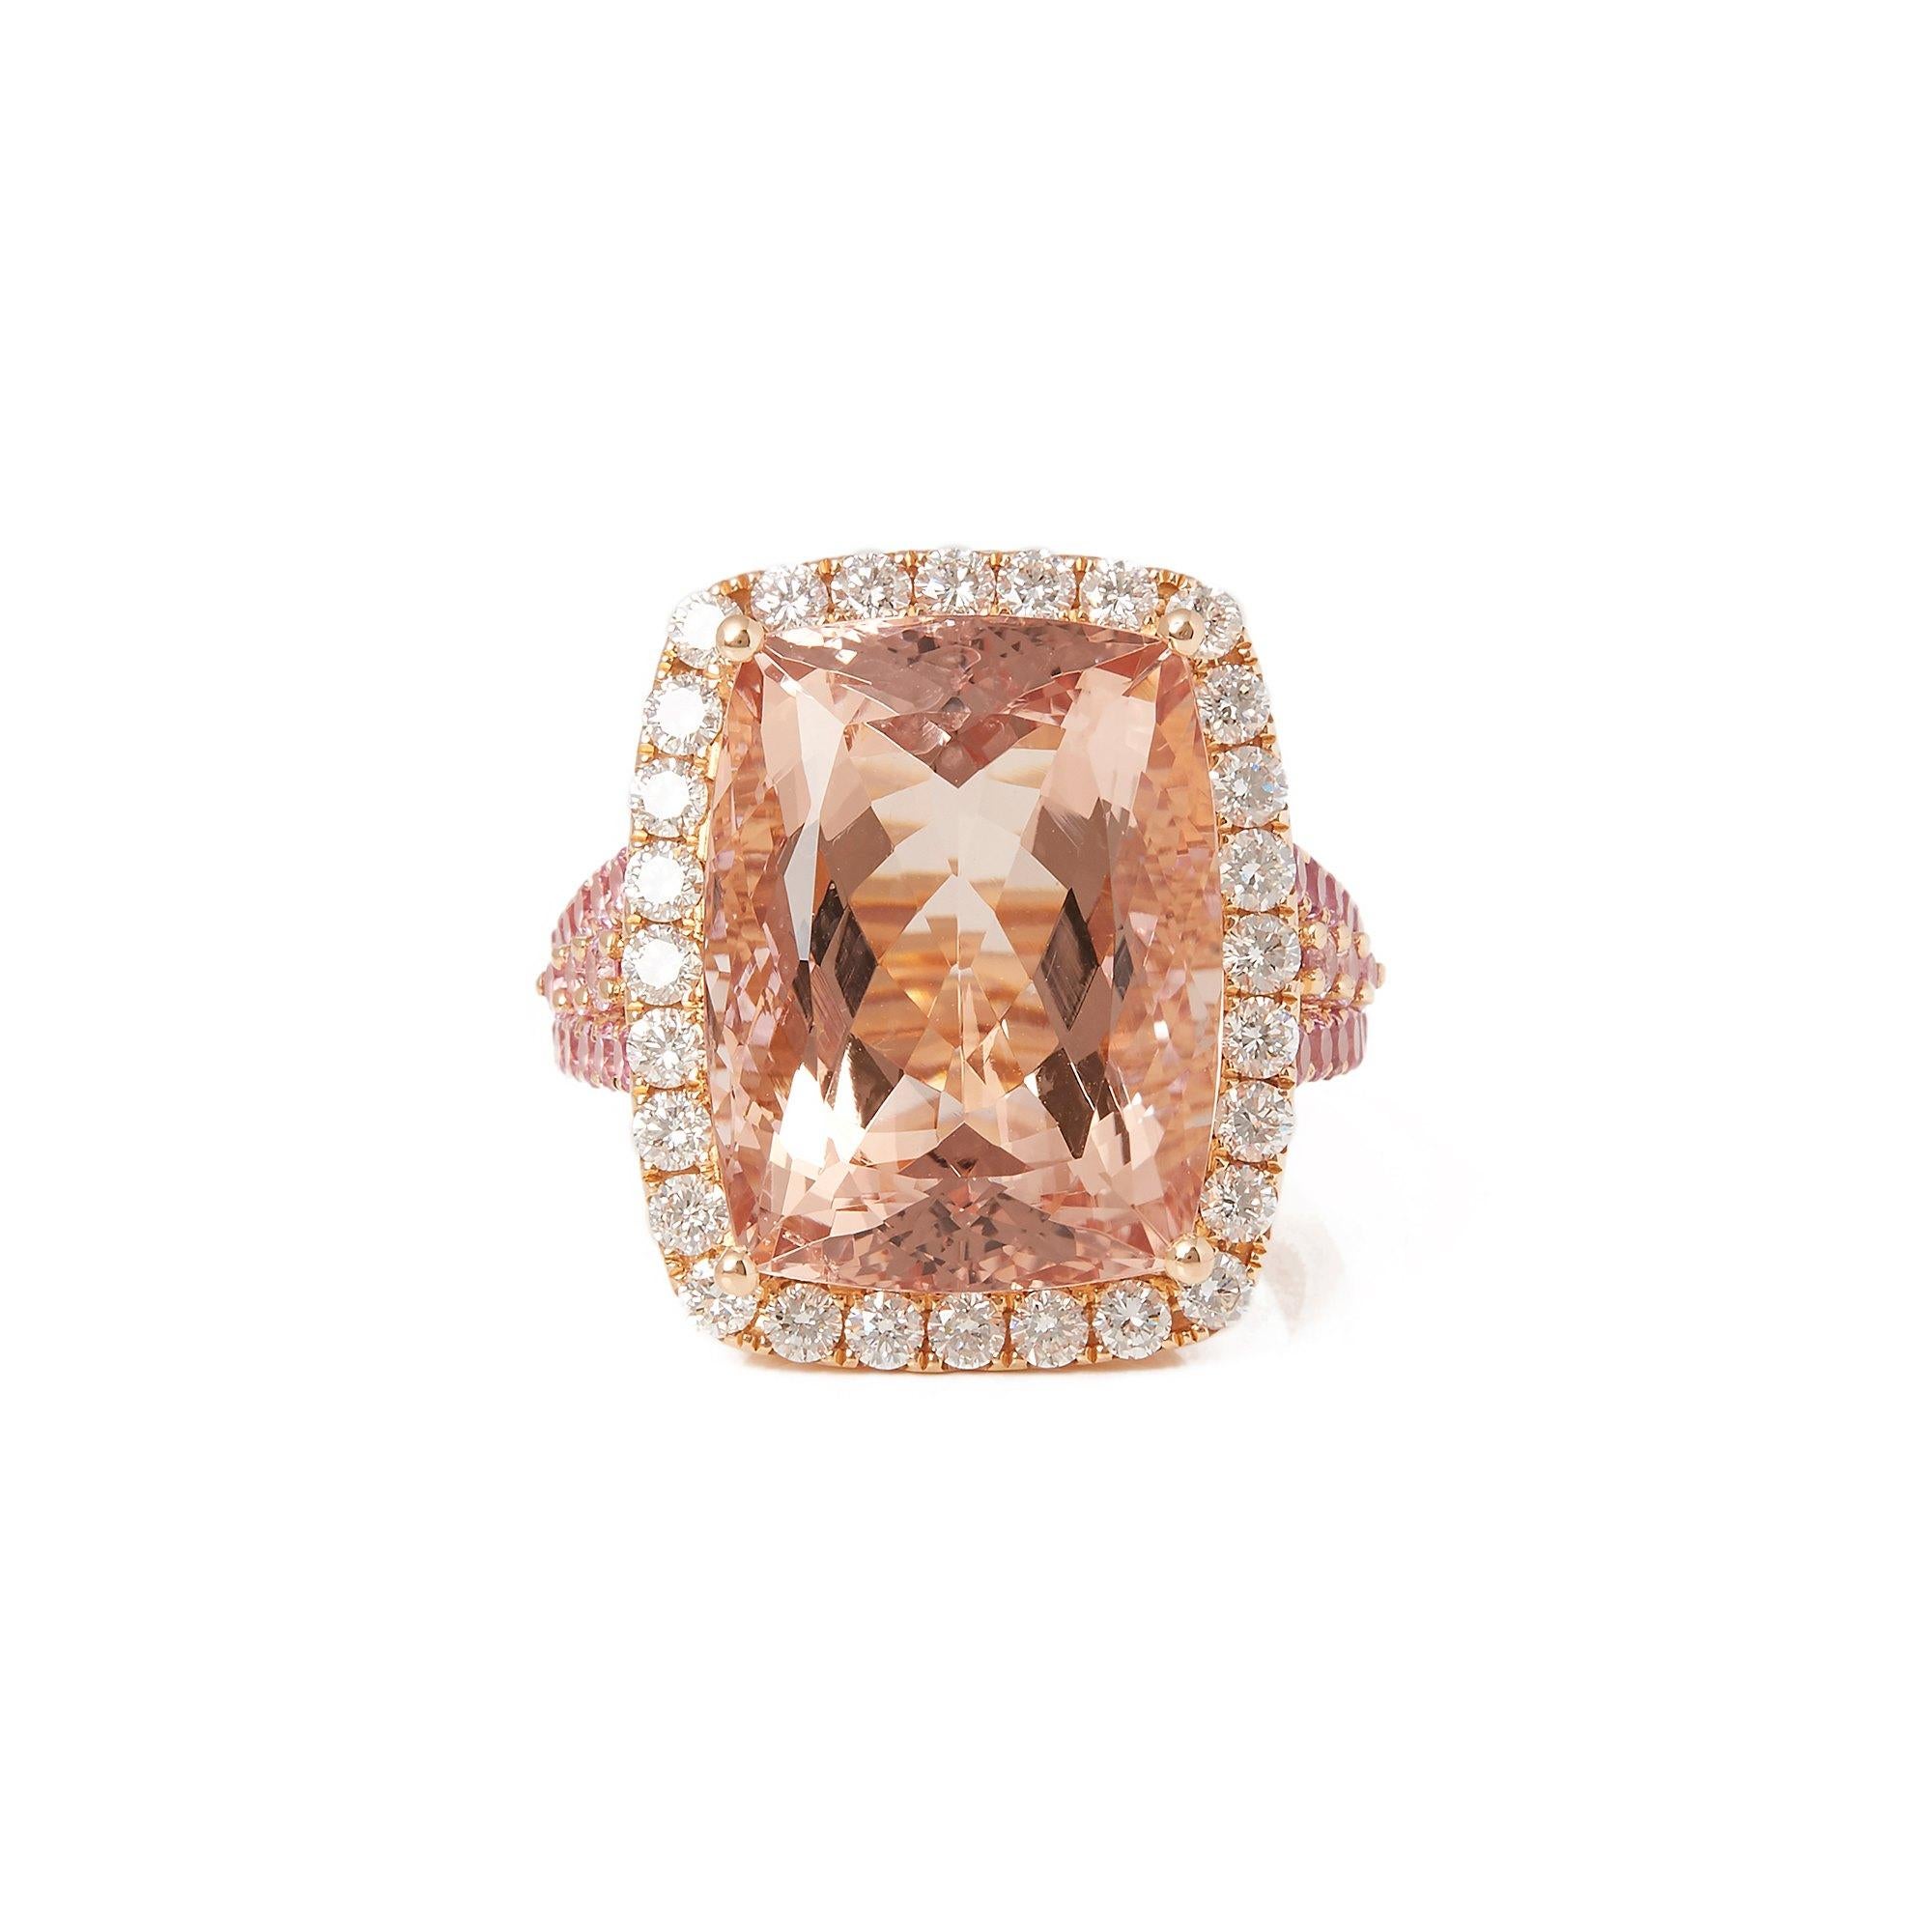 This ring designed by David Jerome is from his private collection and features one cushion cut morganite totalling 14.99cts sourced in Brazil. Set with round brilliant cut Diamonds totalling 2.14cts mounted in an 18k rose gold setting. Finger size